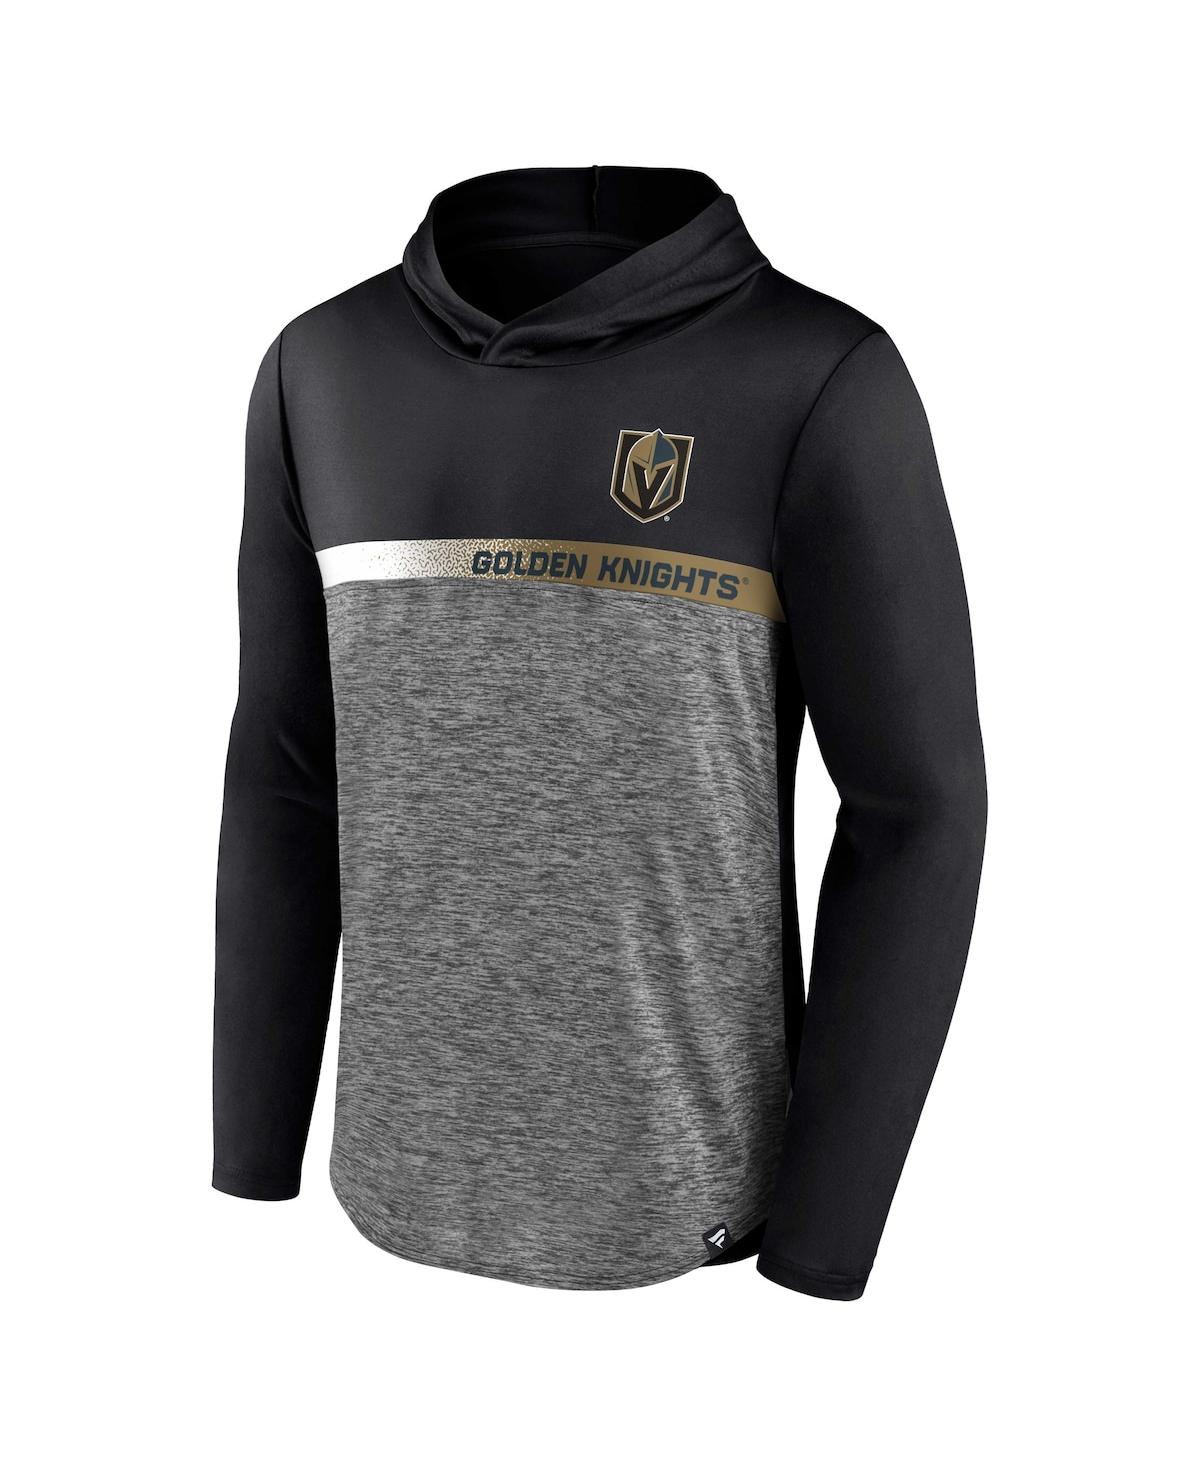 Vegas Golden Knights Stanley Cup 2023 Champions Signature Roster Graphic  T-Shirt - Black - Mens